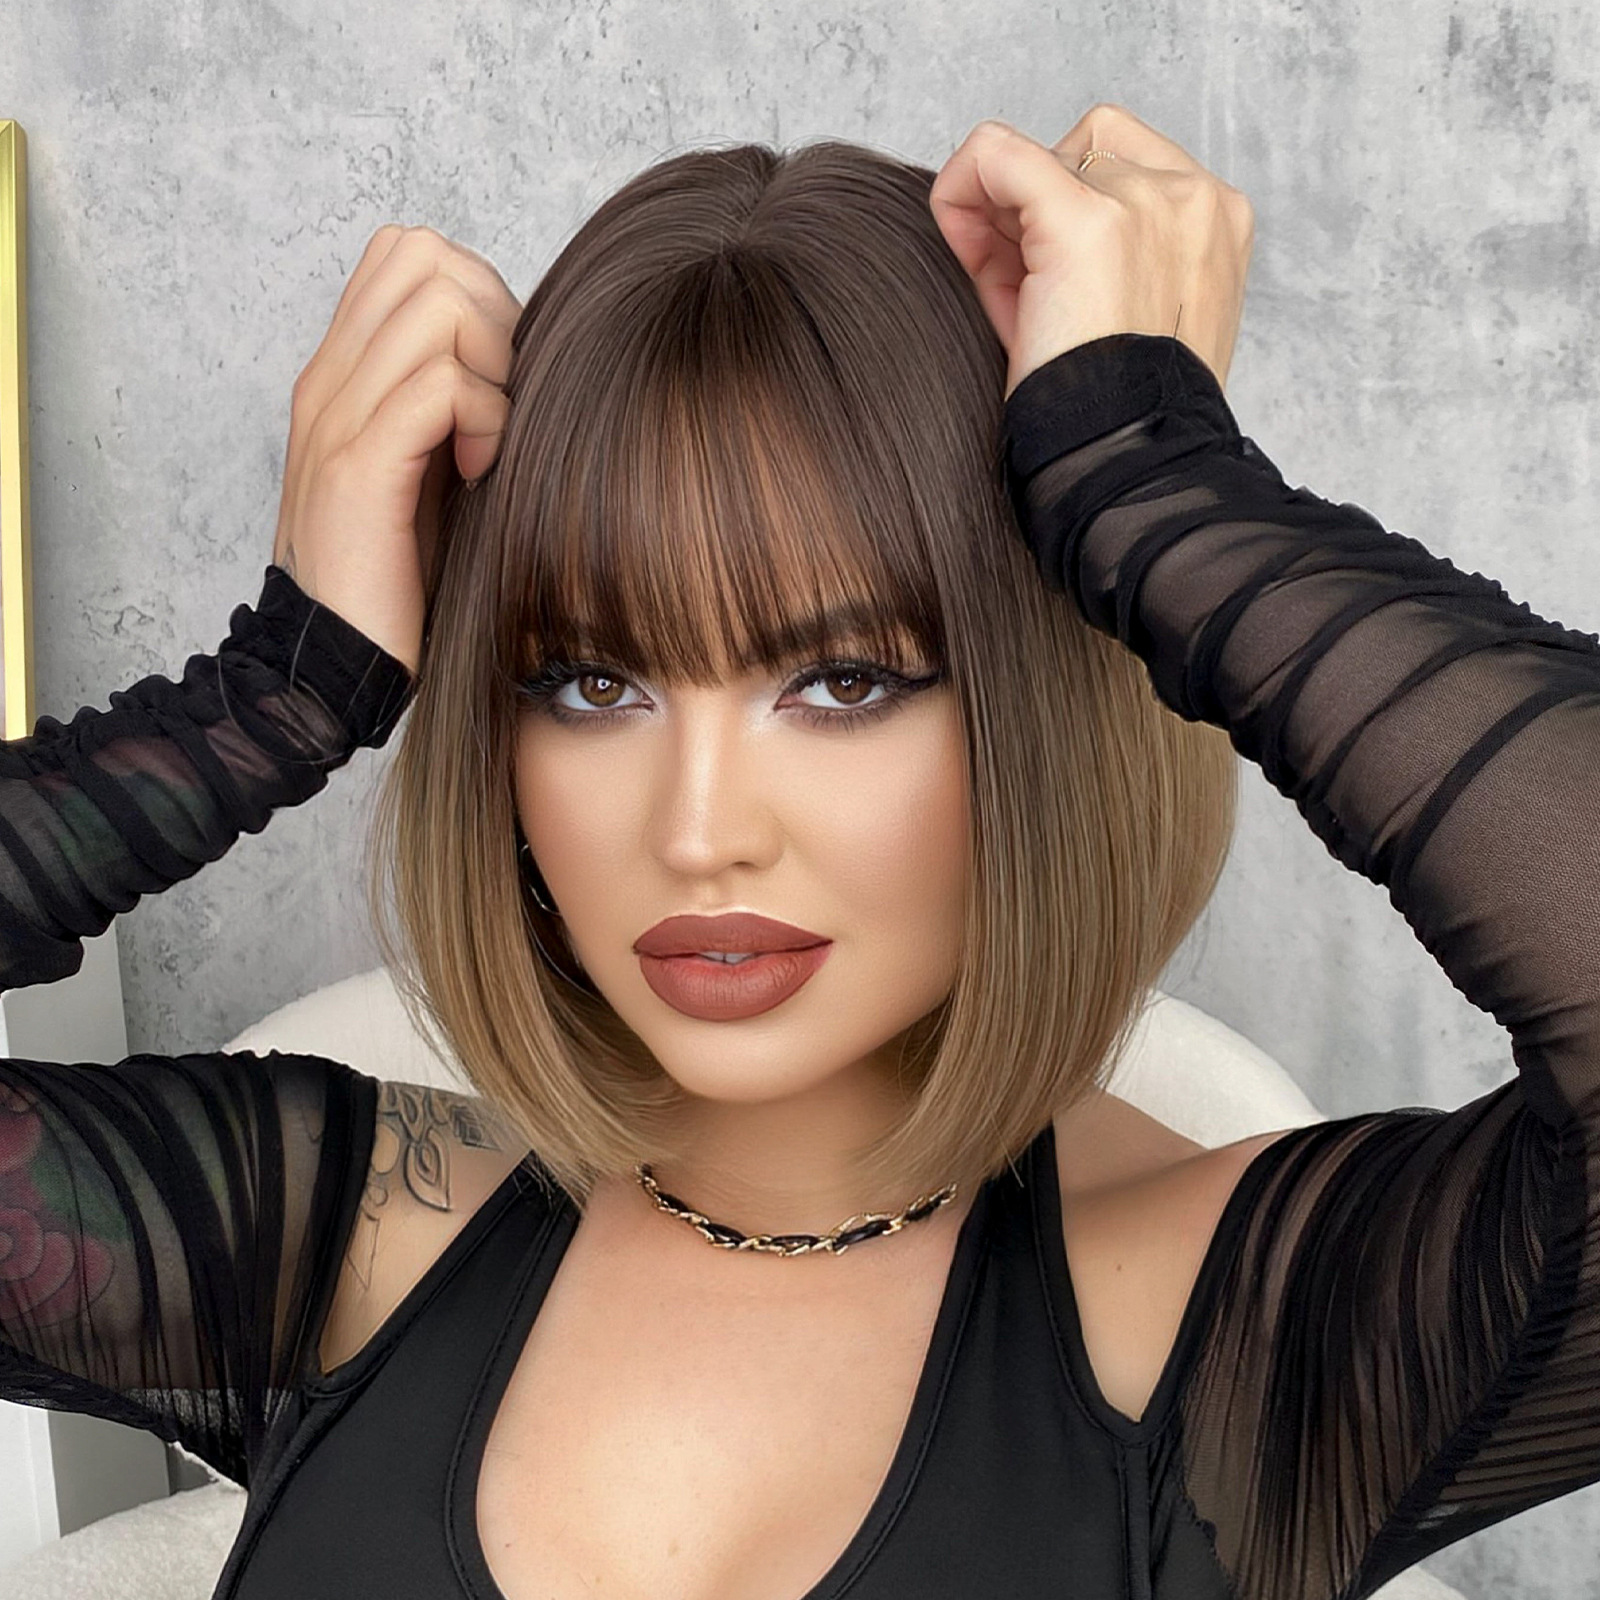 A fashionable female wig with short hair in a BOB head style, made from synthetic material with a gradient color and bangs for a trendy appearance